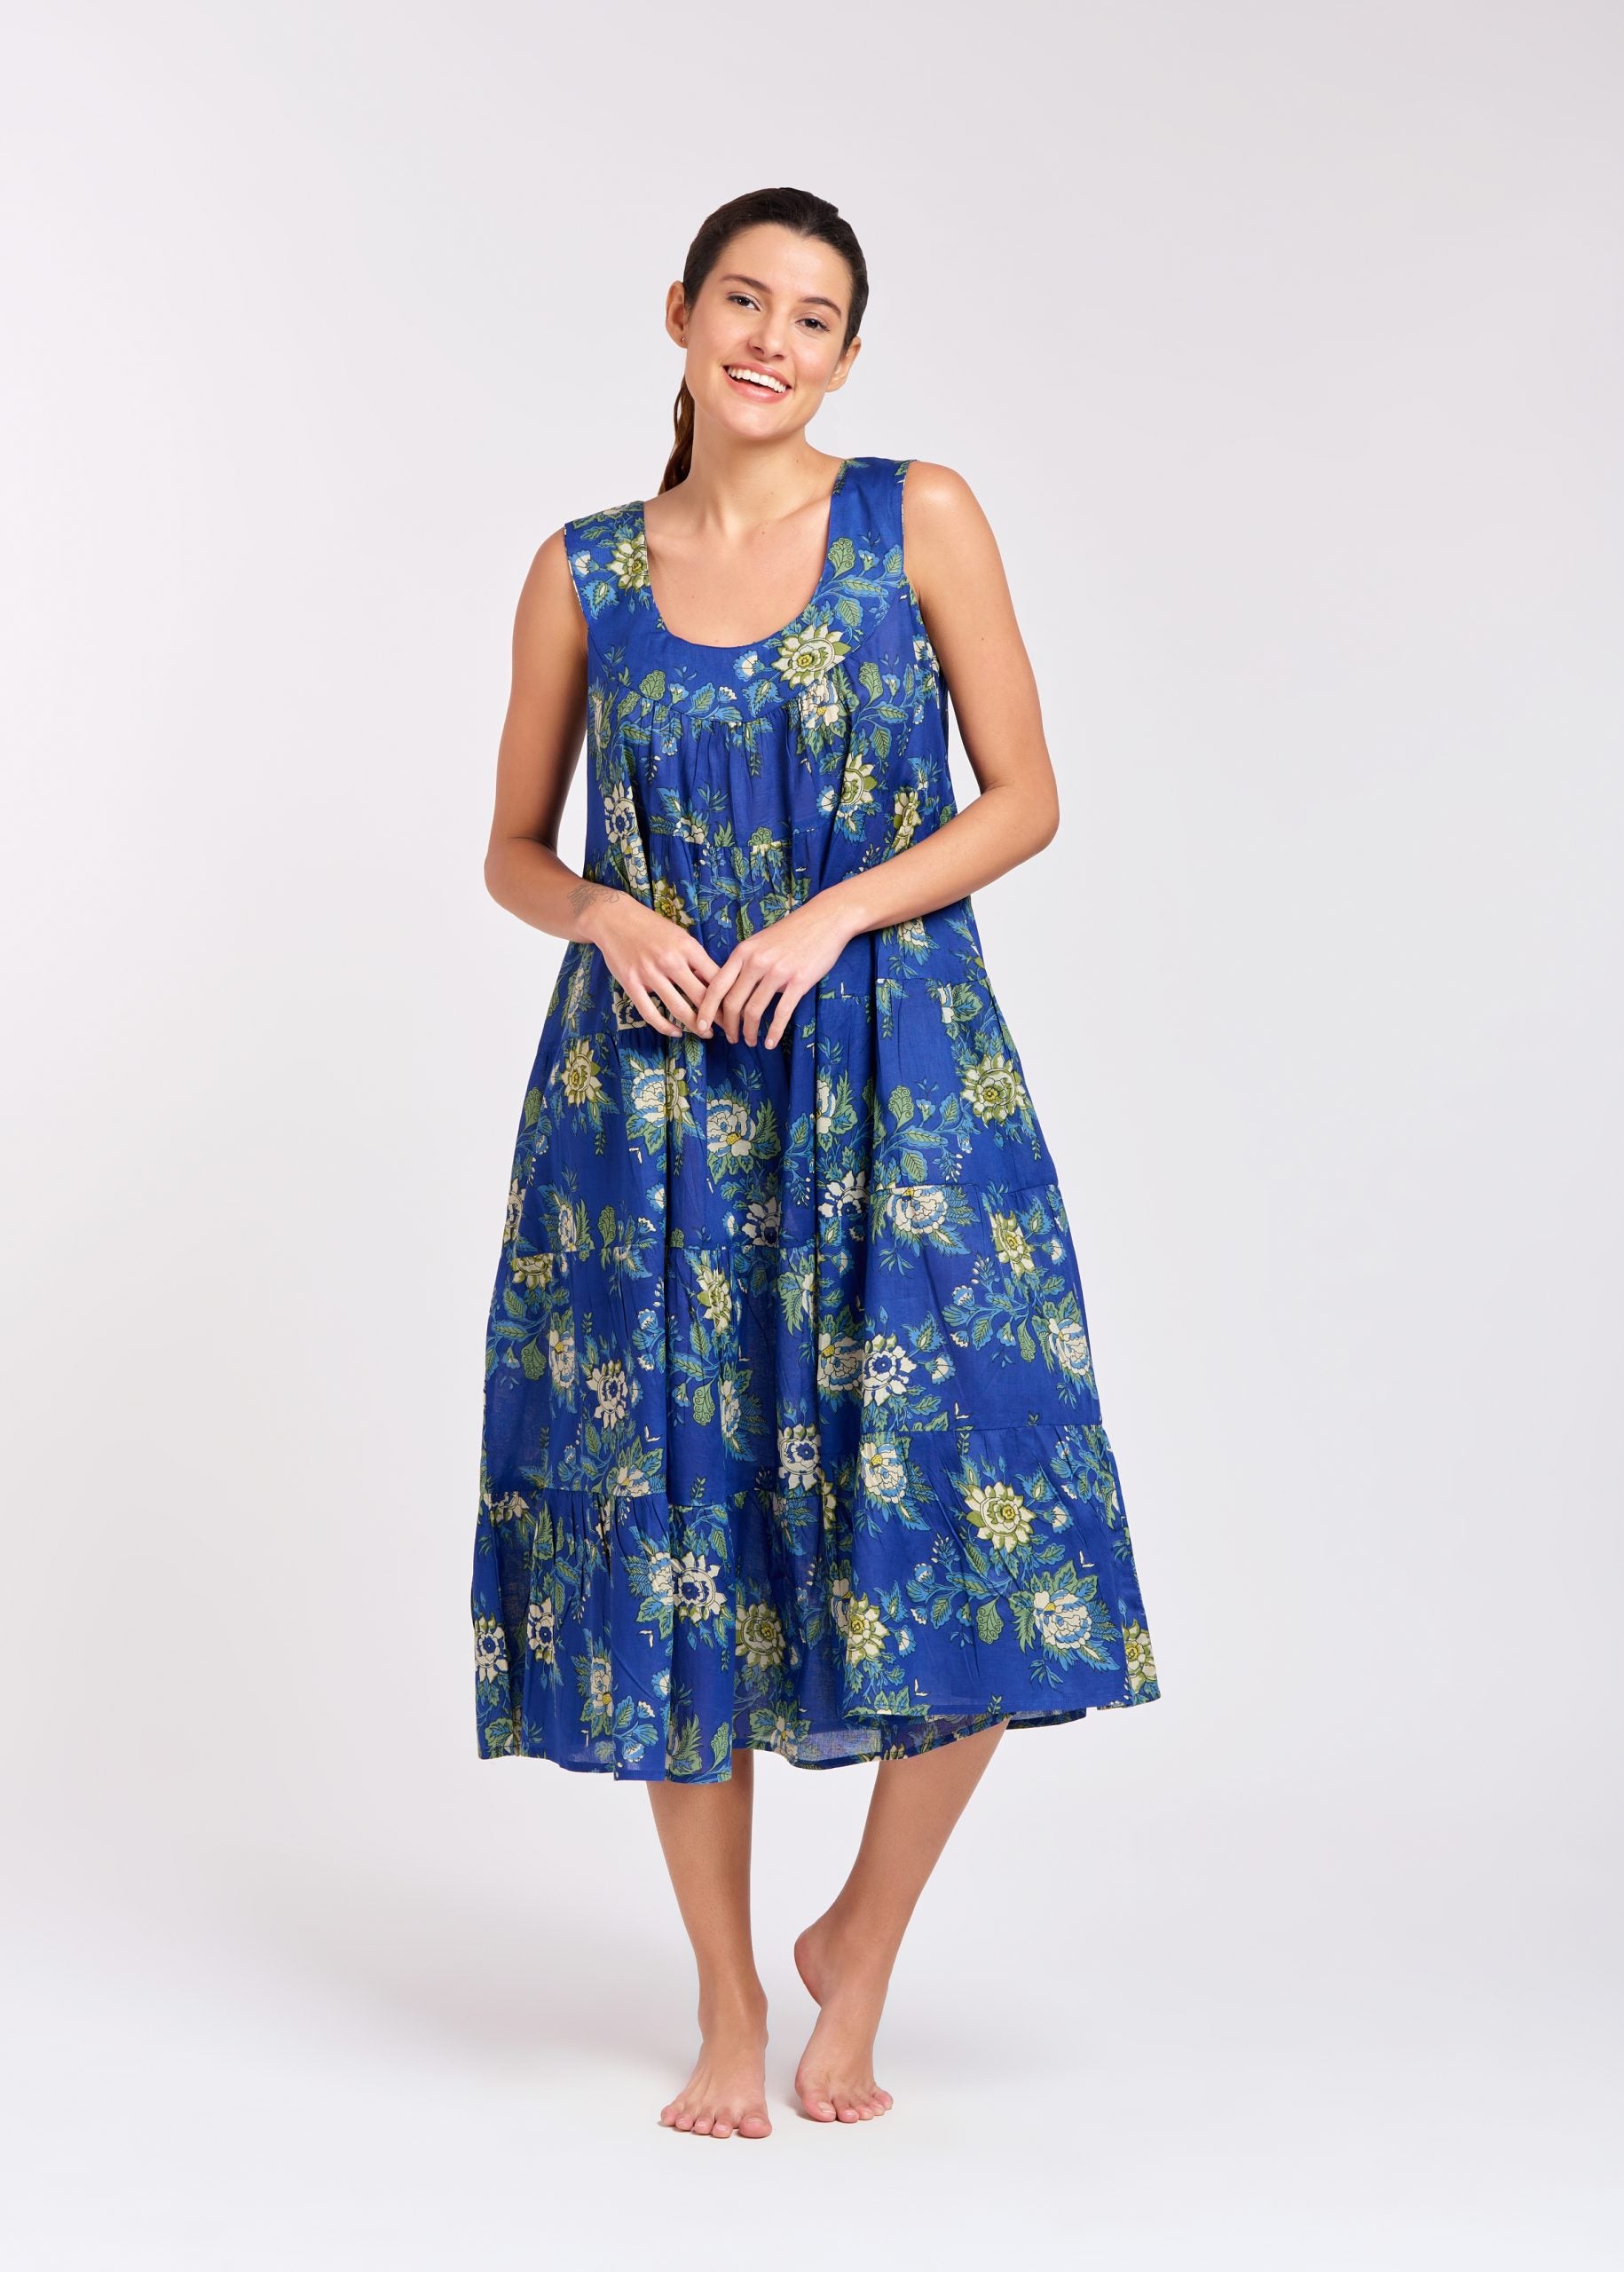 Arabella Blue Printed Tiered Dress Eclectopia Gifts and Specialty Homewares 